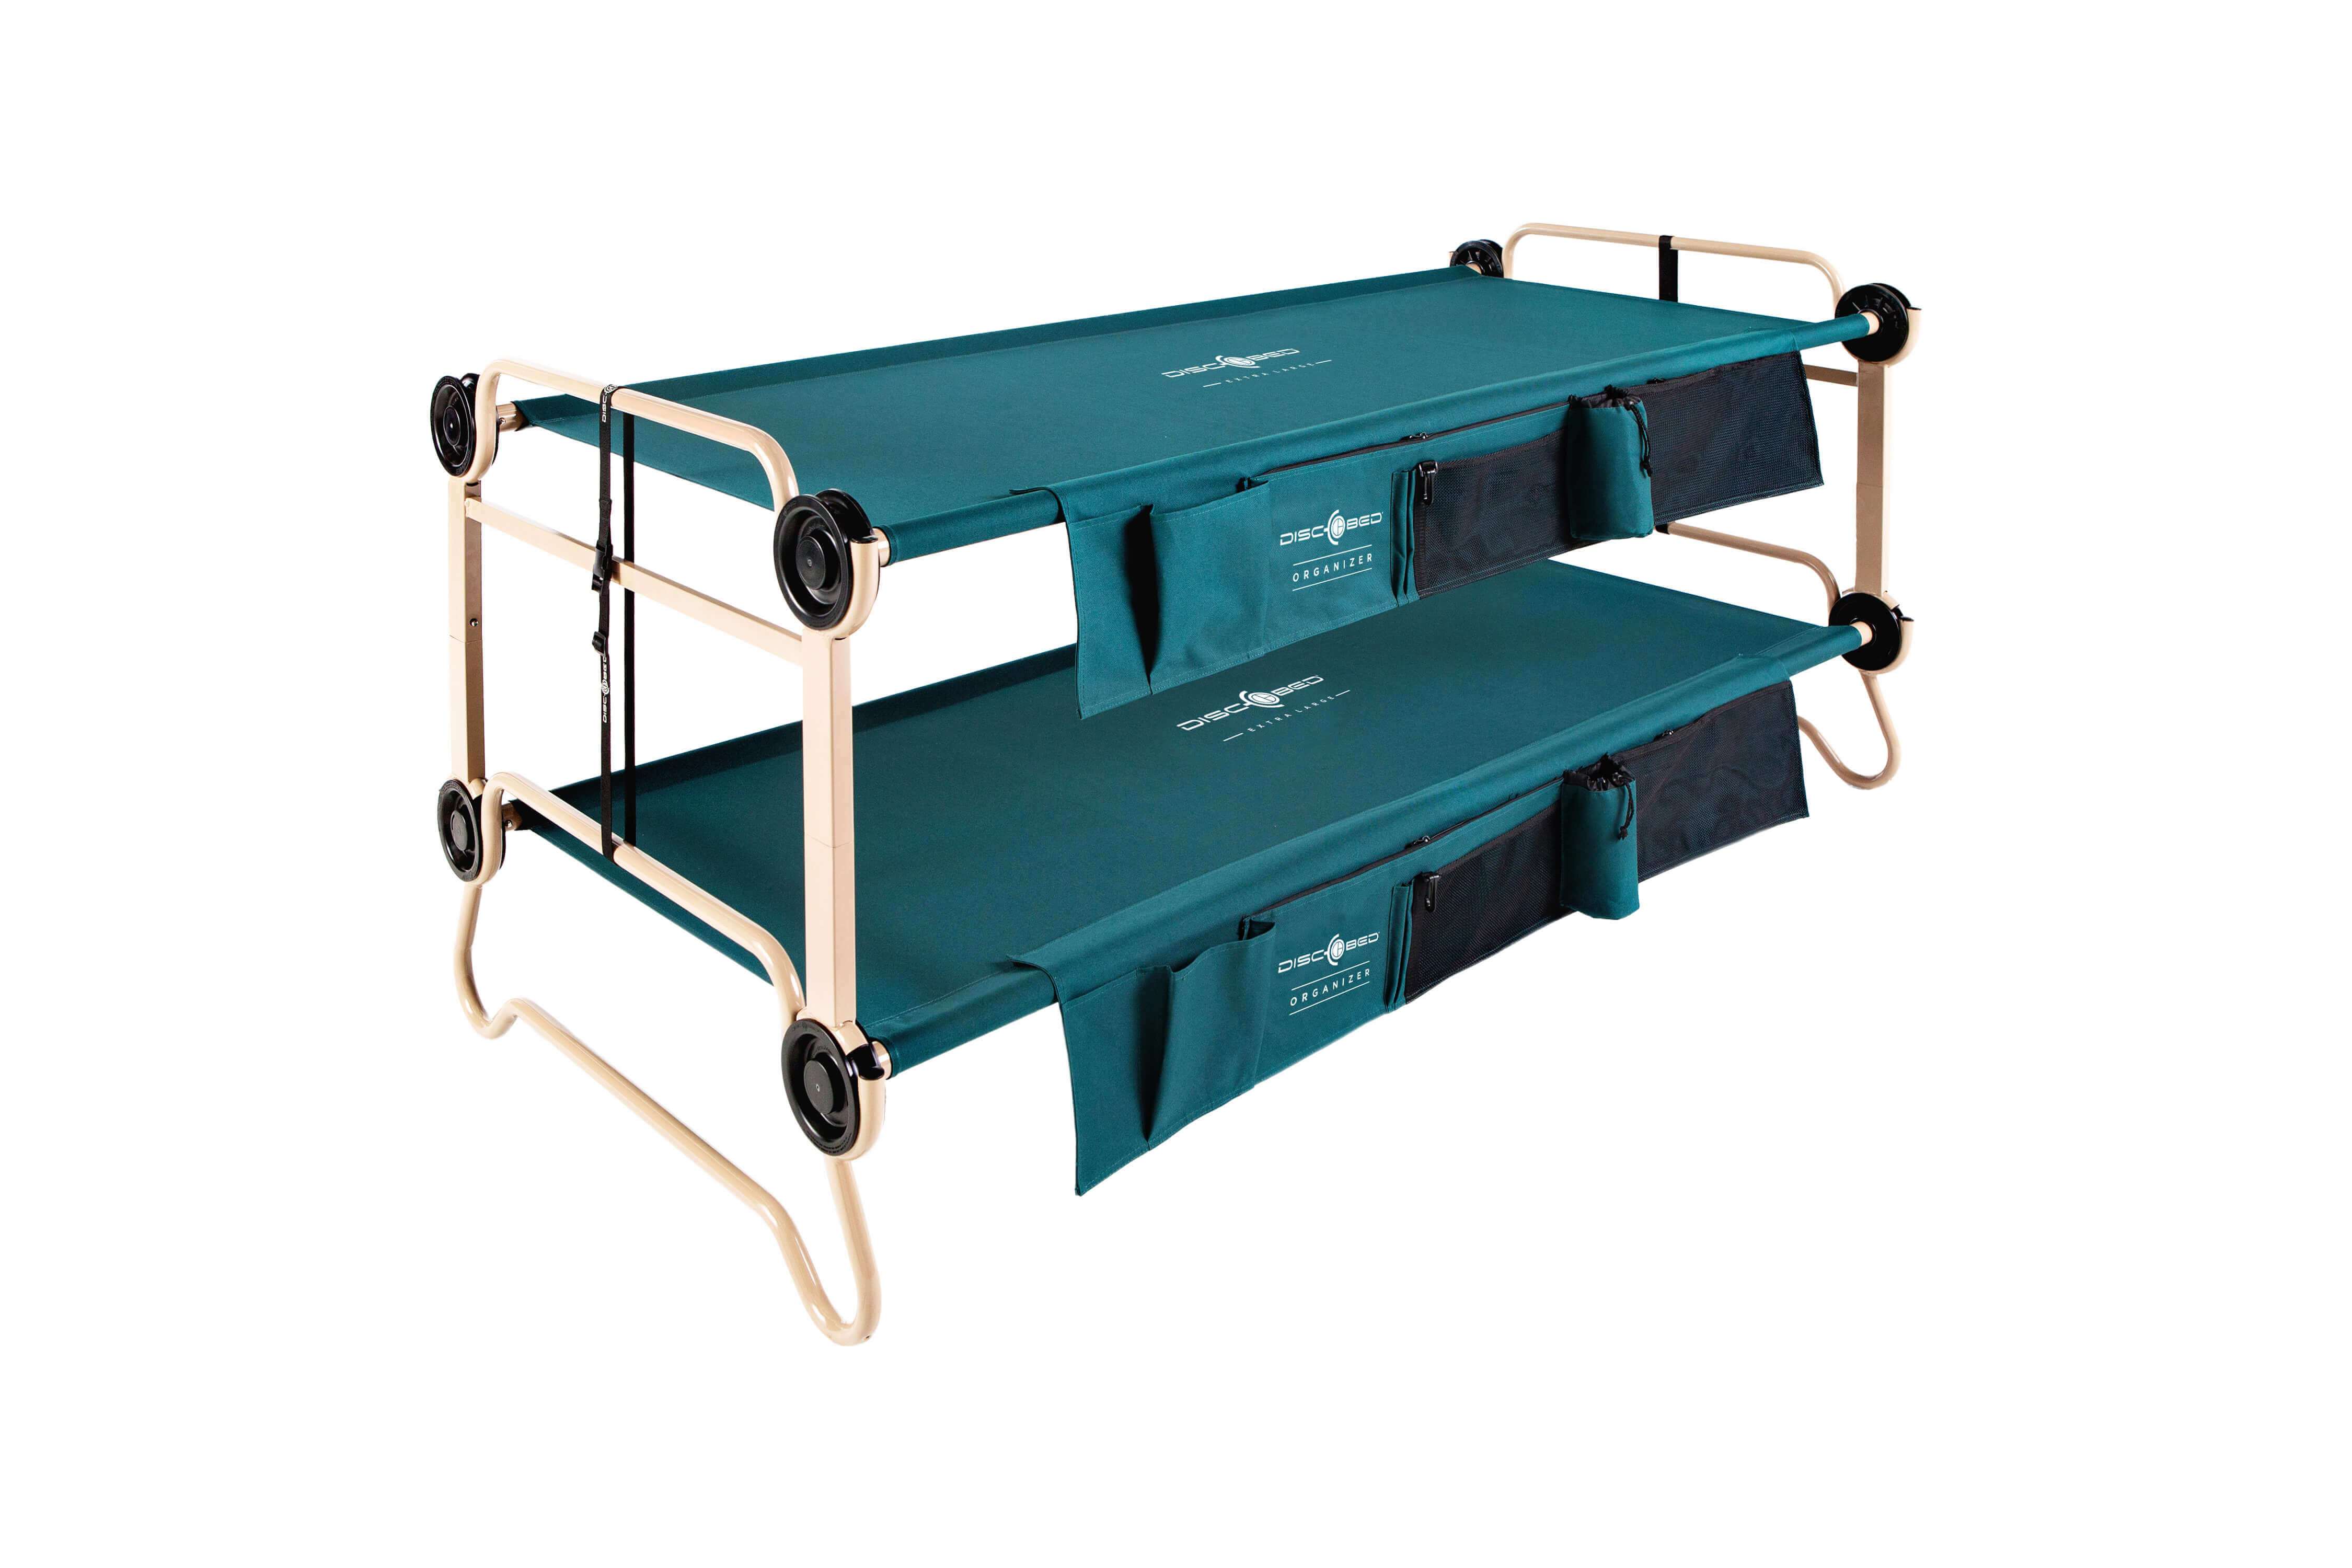 Disc O Bed Trailblazer Camping Bunk Beds, Collapsible Camping Bunk Bed